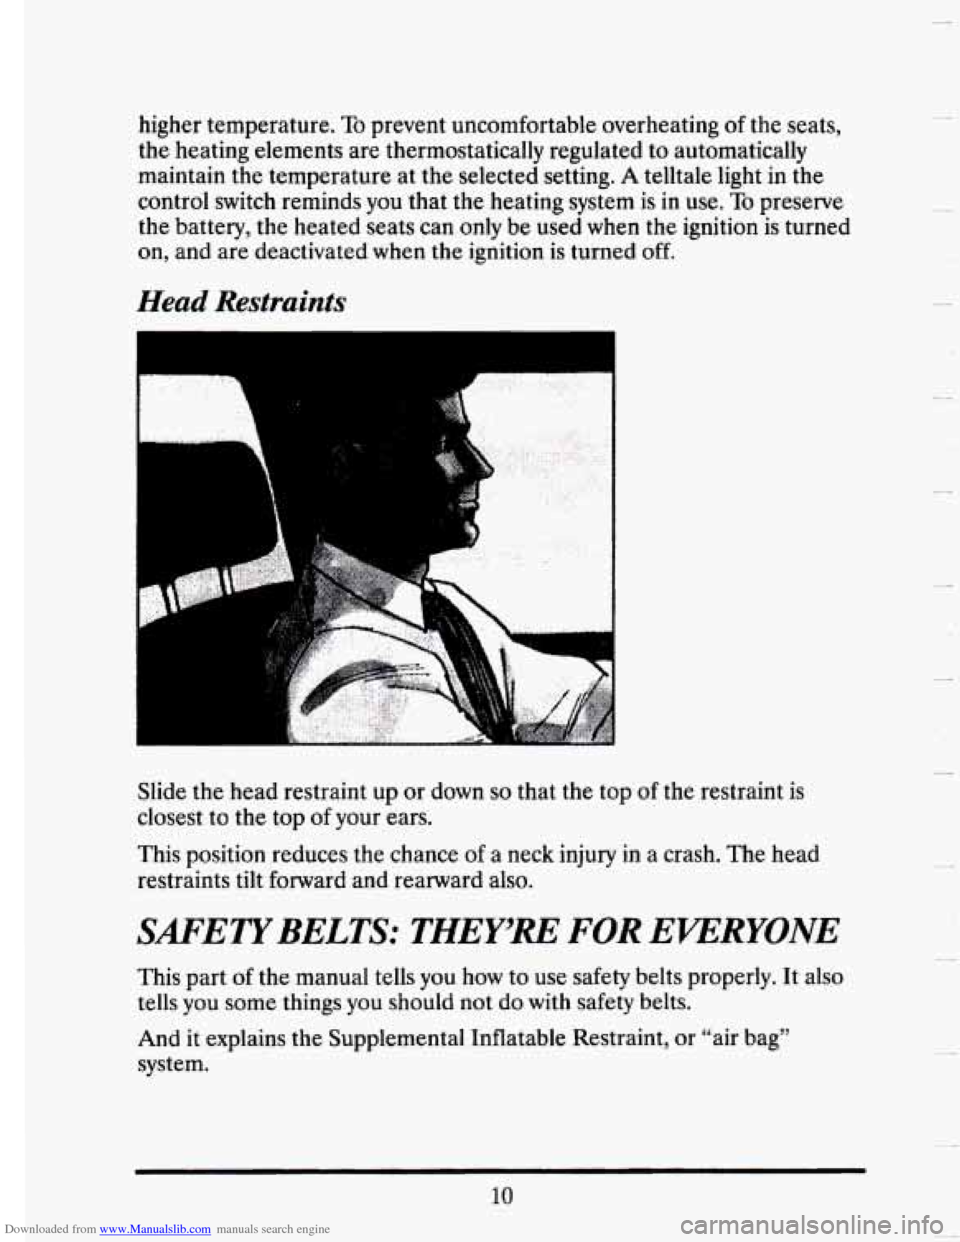 CADILLAC SEVILLE 1993 4.G Owners Manual Downloaded from www.Manualslib.com manuals search engine higher temperature.  To prevent  uncomfortable  overheating  of the  seats, 
the  heating  elements  are  thermostatically  regulated  to  auto